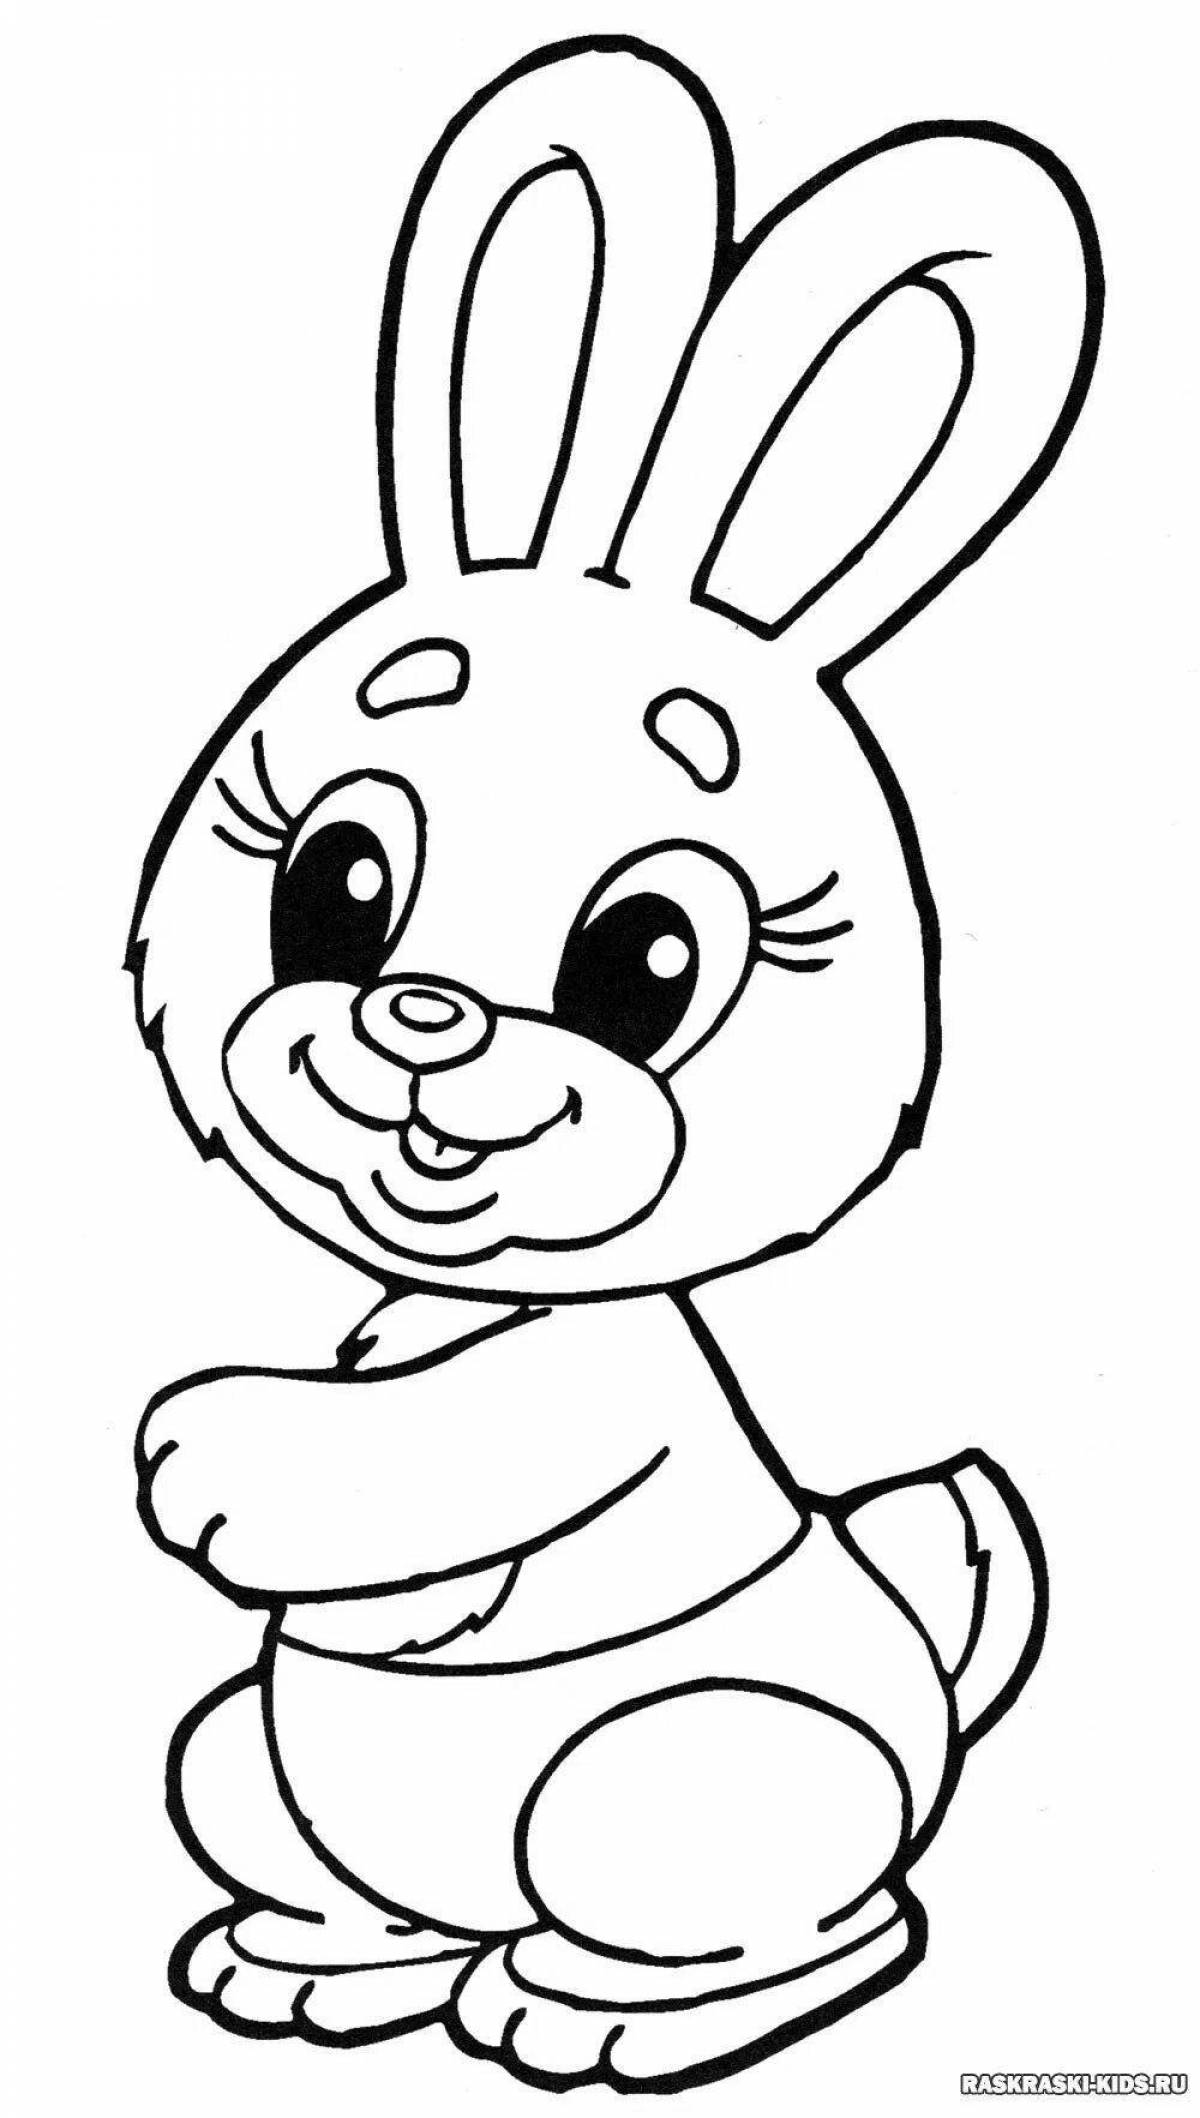 Animated print bunny coloring book